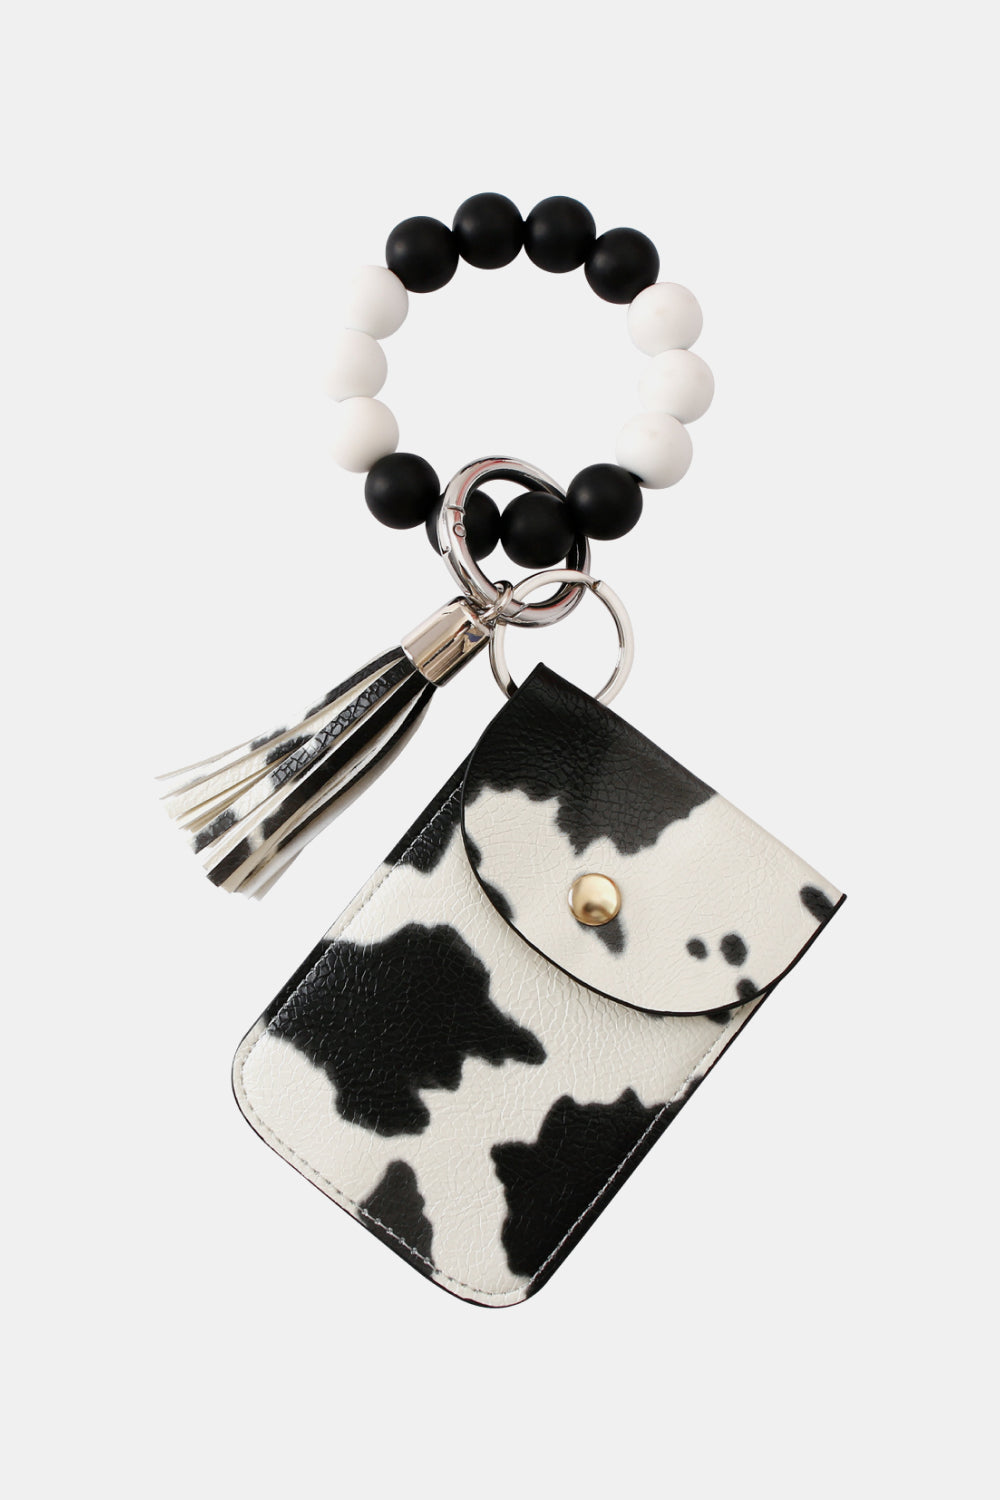 Trendsi Cupid Beauty Supplies Cow Print / One Size Keychains Bead Wristlet Key Chain with Wallet